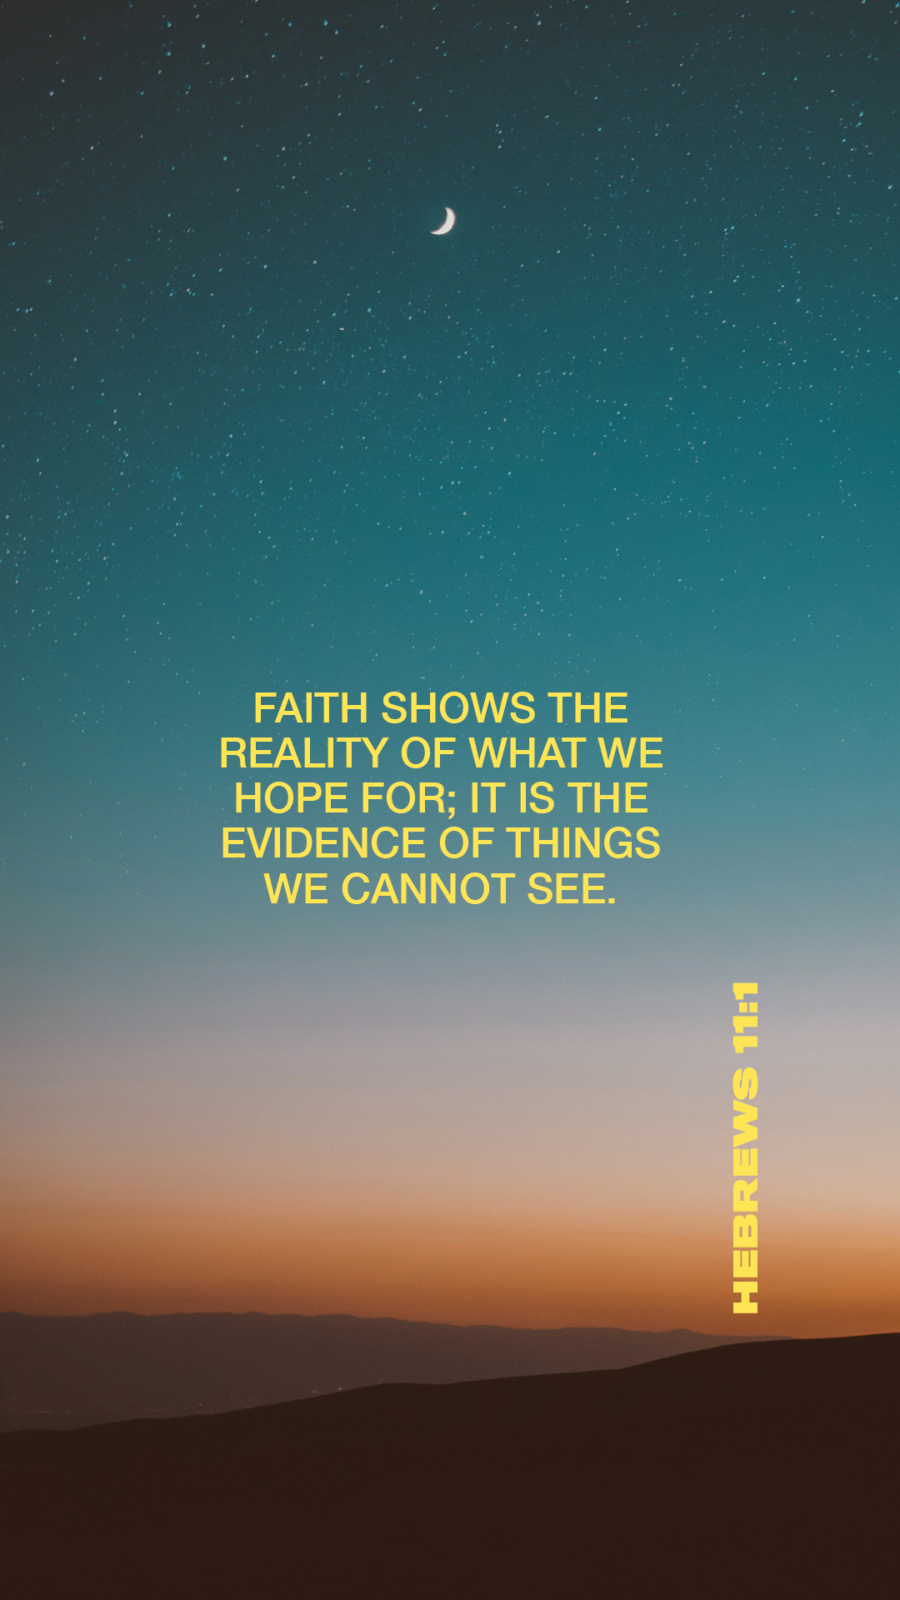 “Faith shows the reality of what we hope for; it is the evidence of things we cannot see.” (Hebrews 11:1)